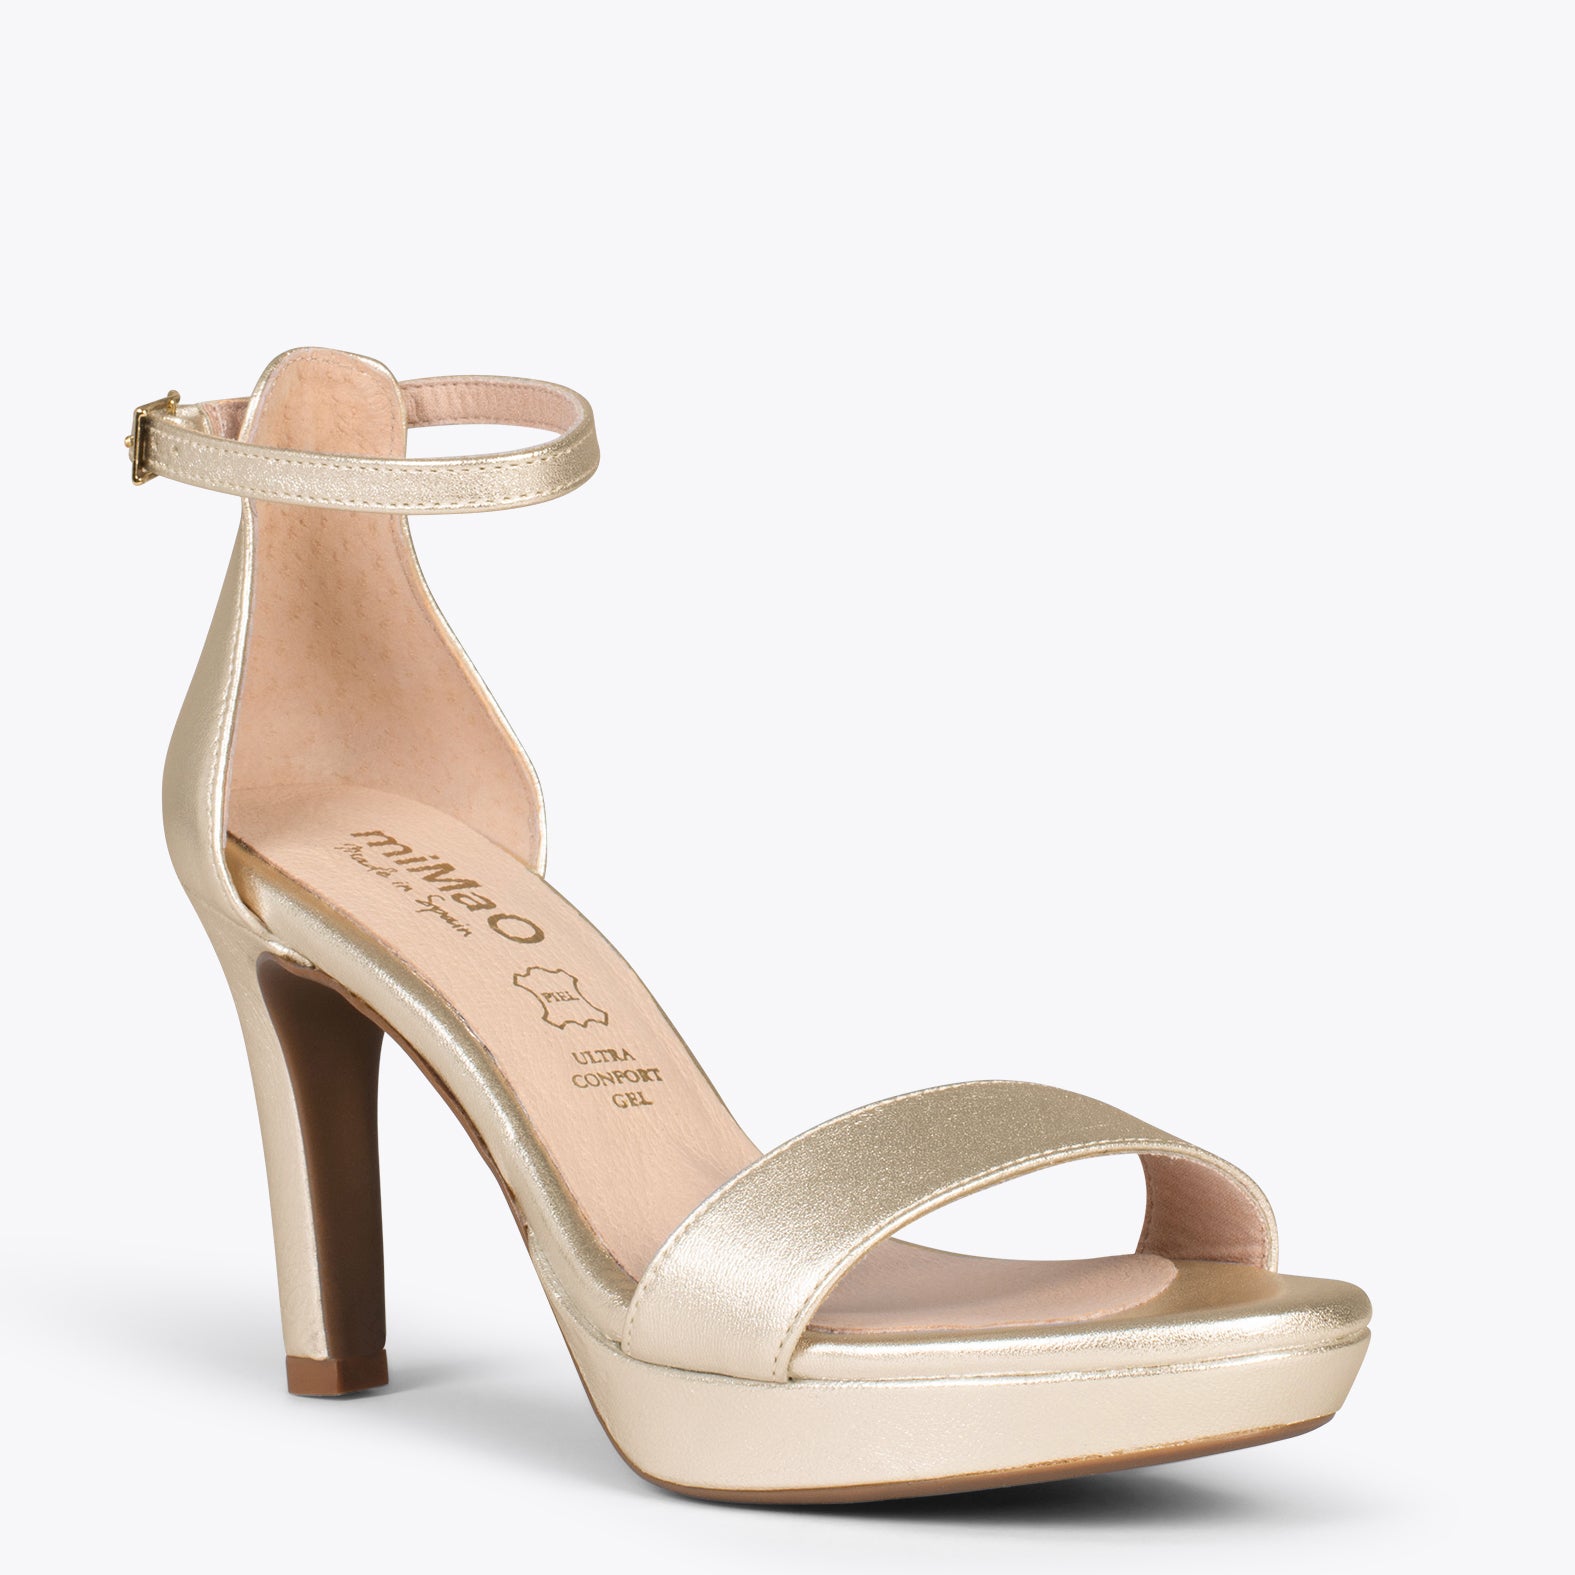 PARTY – GOLD high heel sandals with platform